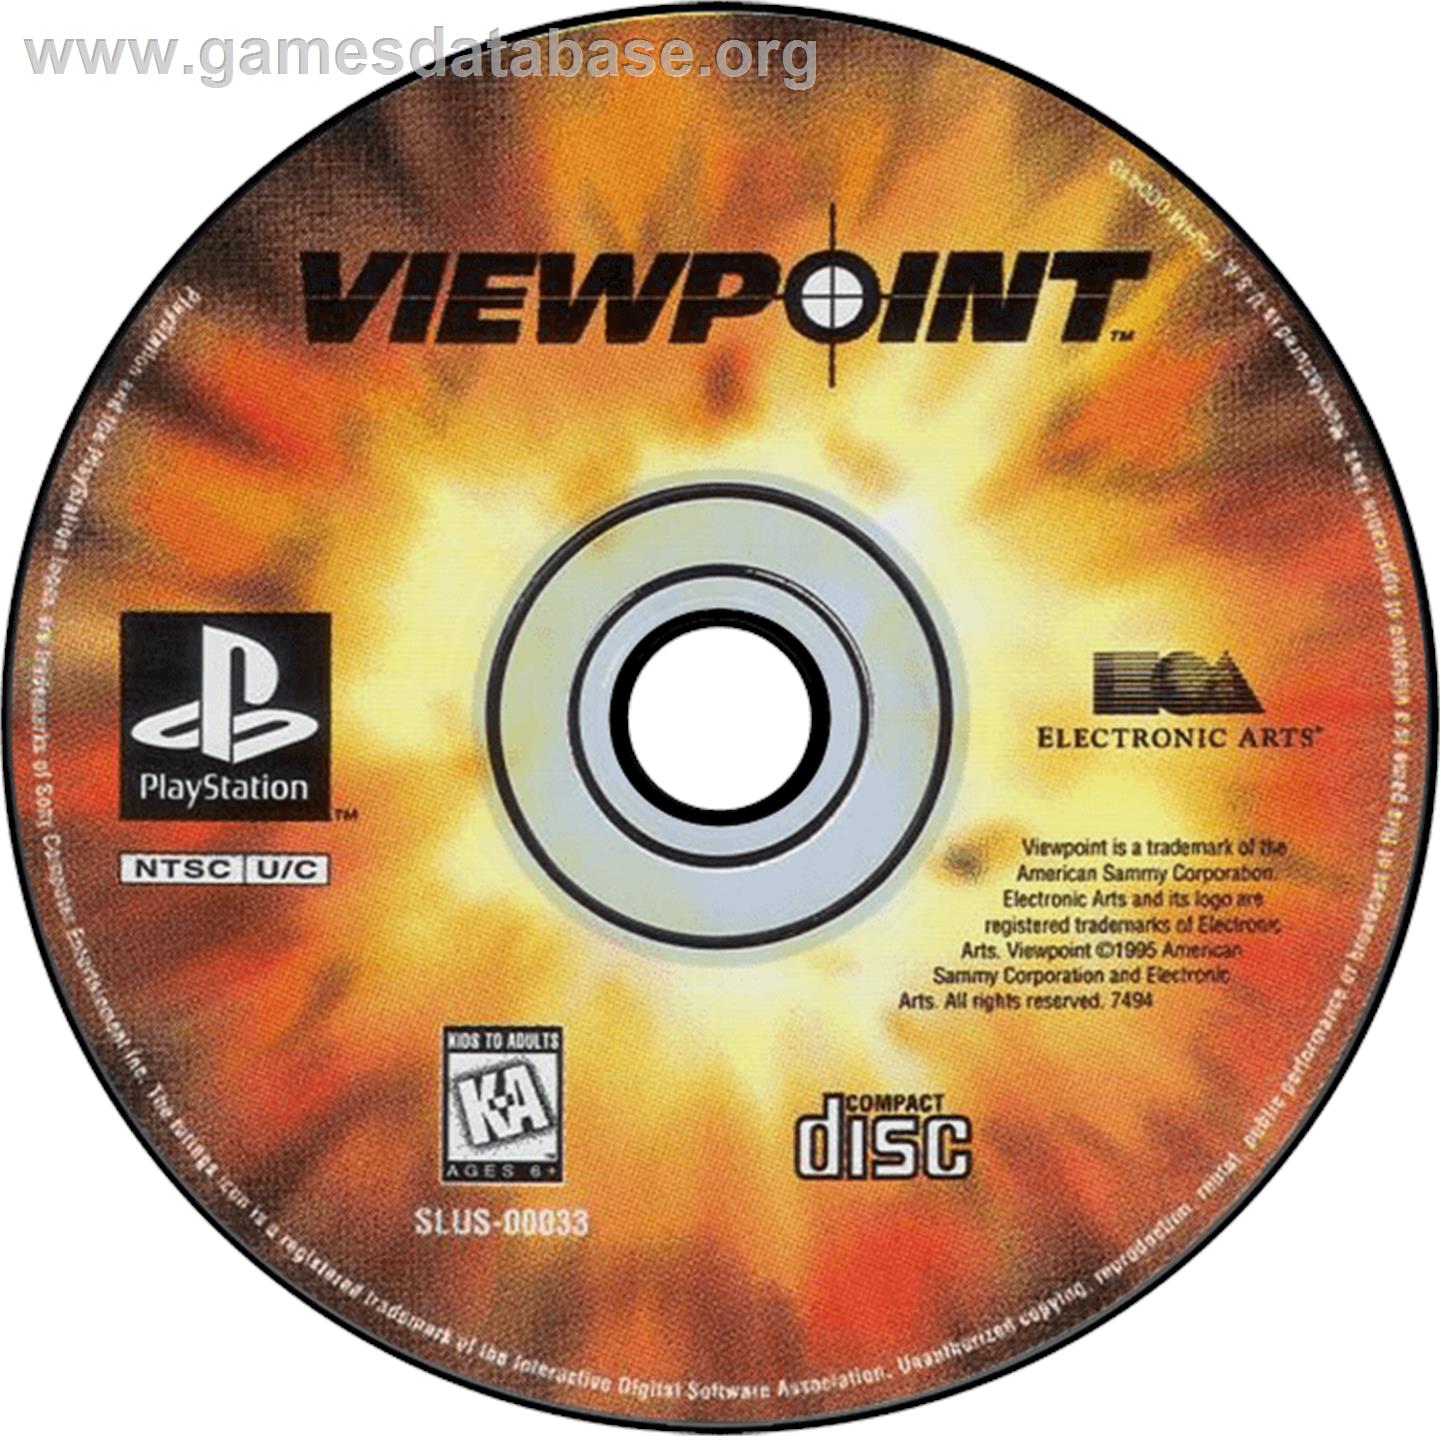 Viewpoint - Sony Playstation - Artwork - Disc